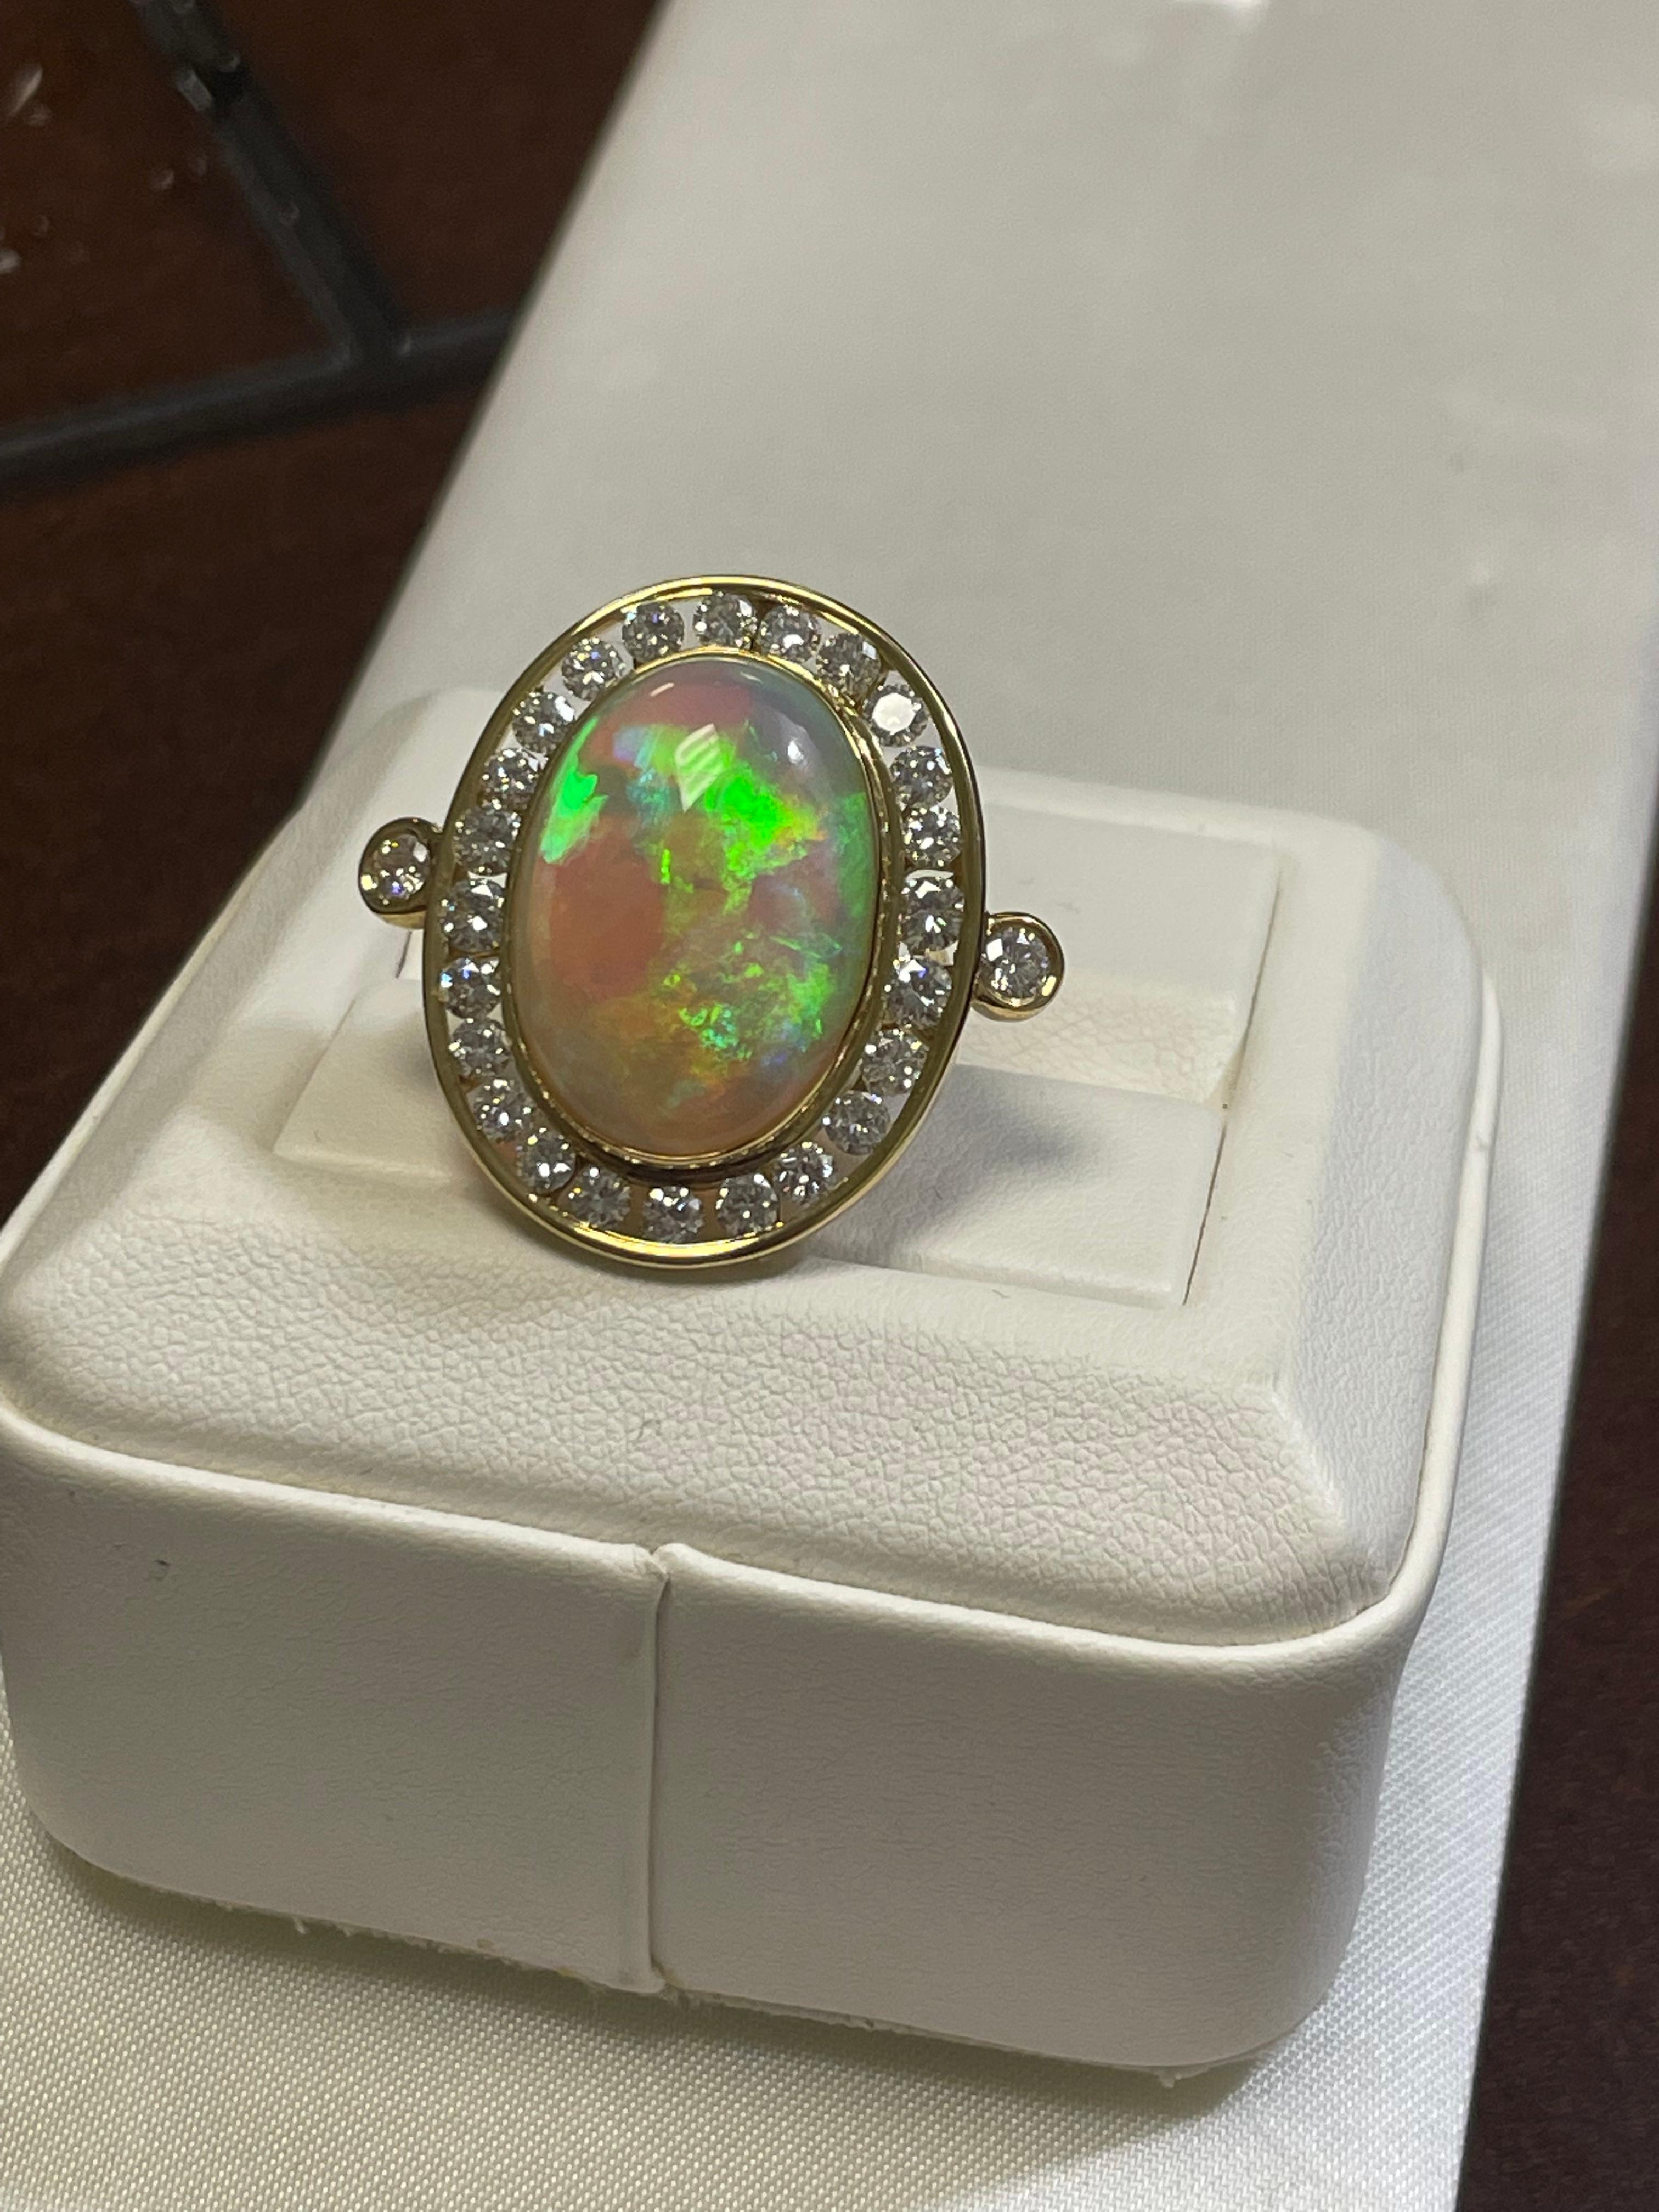 One lady's black opal in crystal white.  Multicolor fire pattern with an average saturation scale. Very bright with flash fire pattern.  Cabochon, oval shape.  Measurements are 21.0 x 15.0 mm.  Weight is 14.5 carats. 27 round brilliant-cut diamonds.